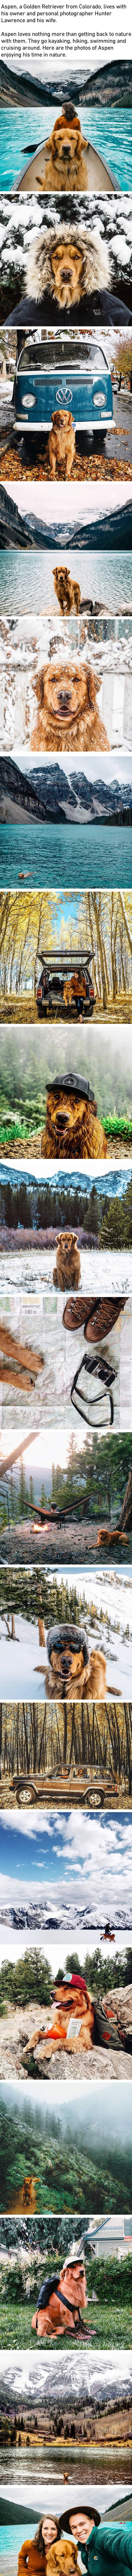 Aspen The Golden Retriever Loves Going On Adventures With His Humans